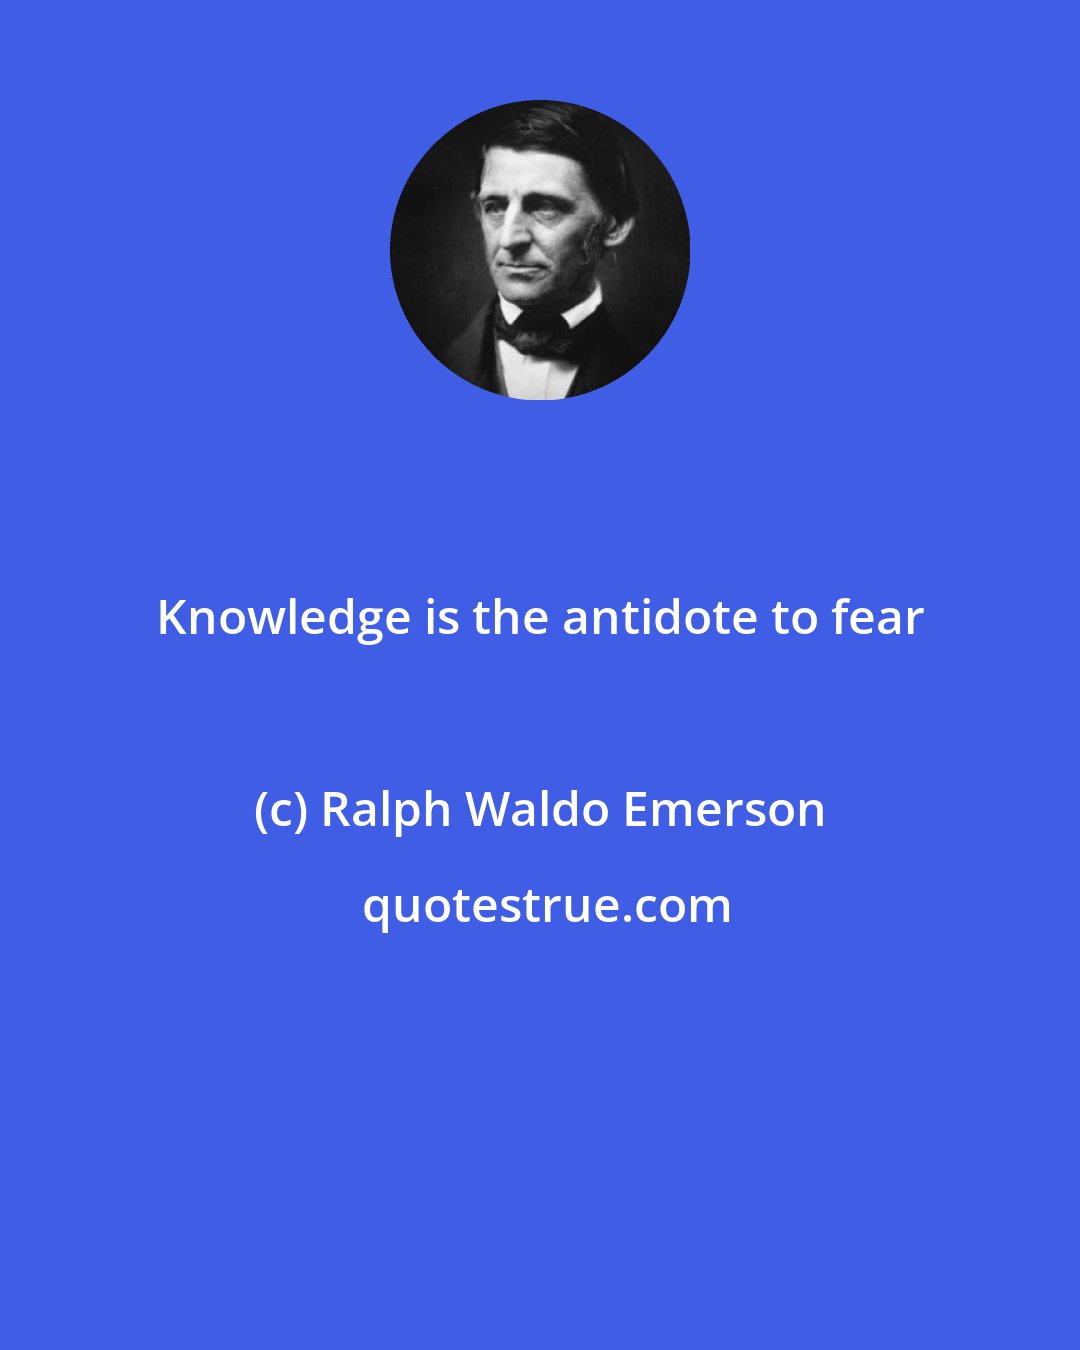 Ralph Waldo Emerson: Knowledge is the antidote to fear